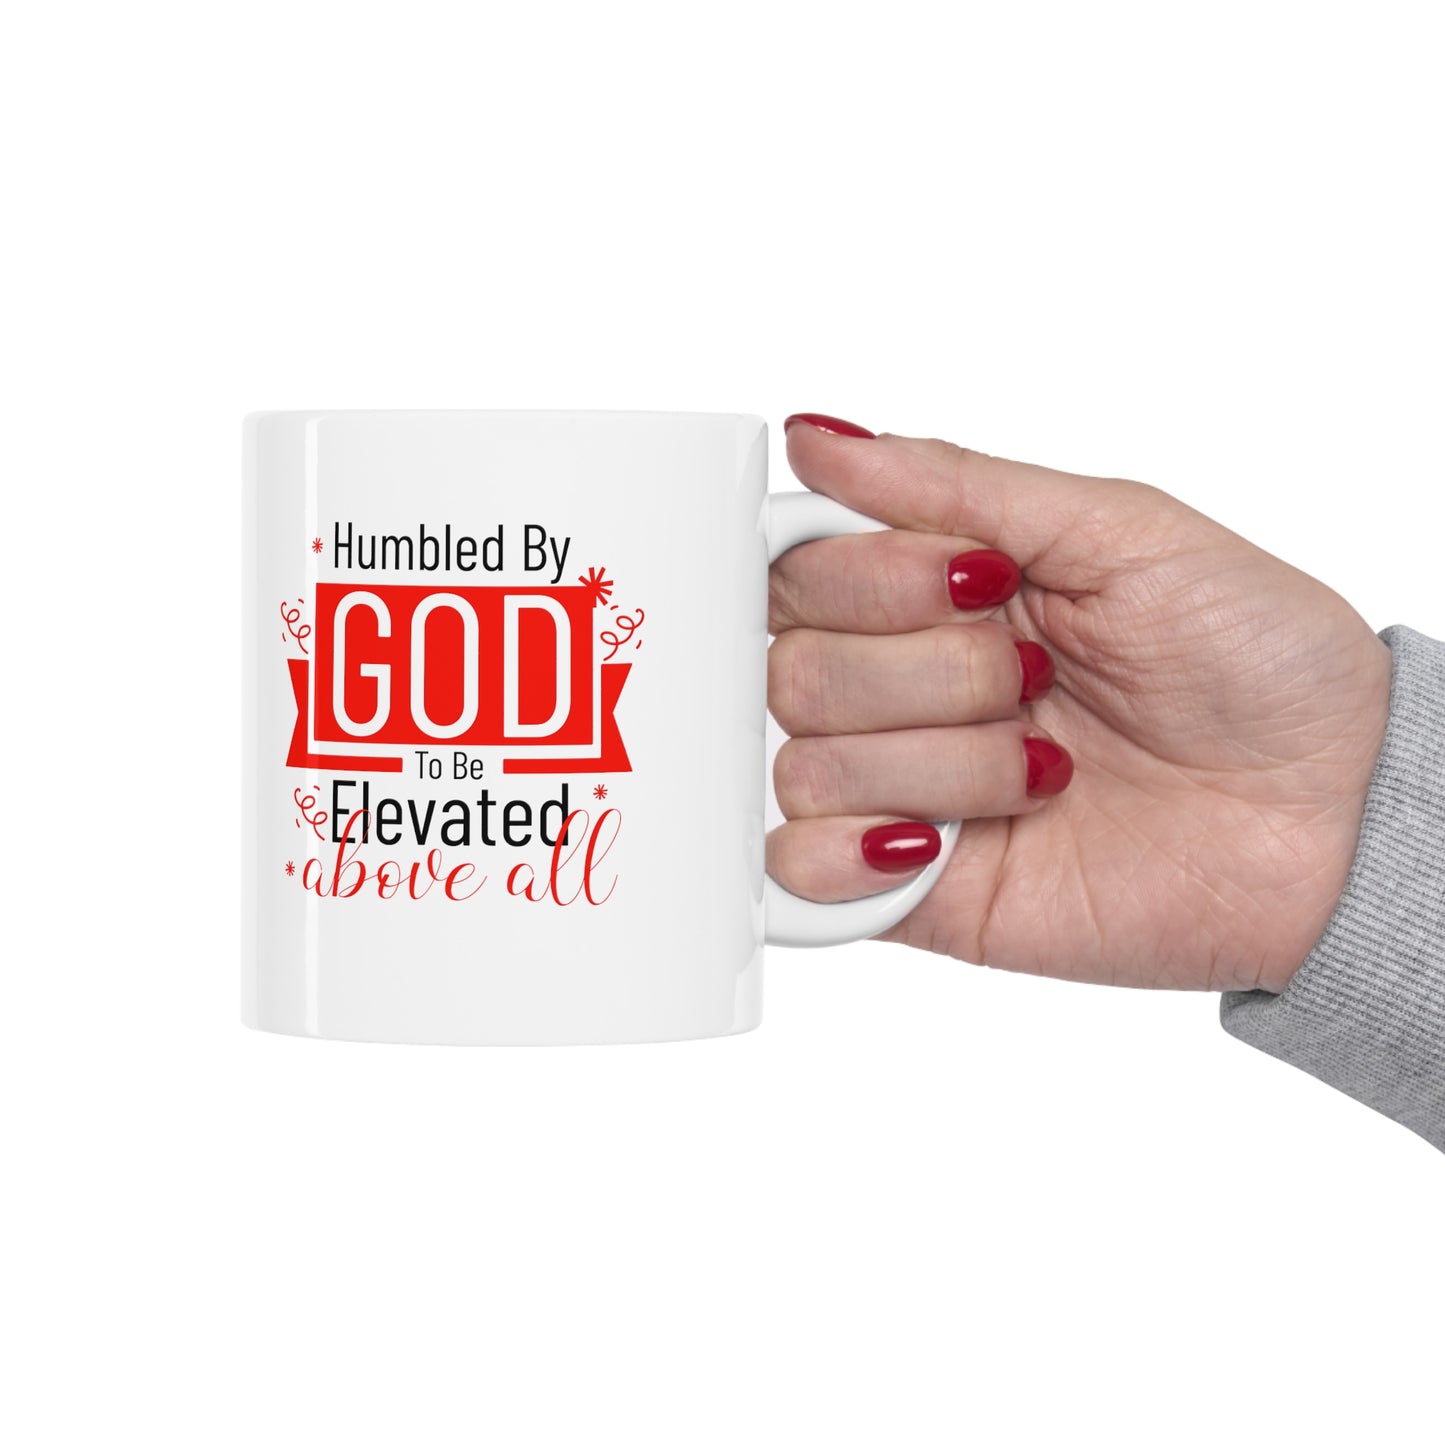 Humbled by God To Be Elevated Above All Christian White Ceramic Mug 11oz (double sided print)